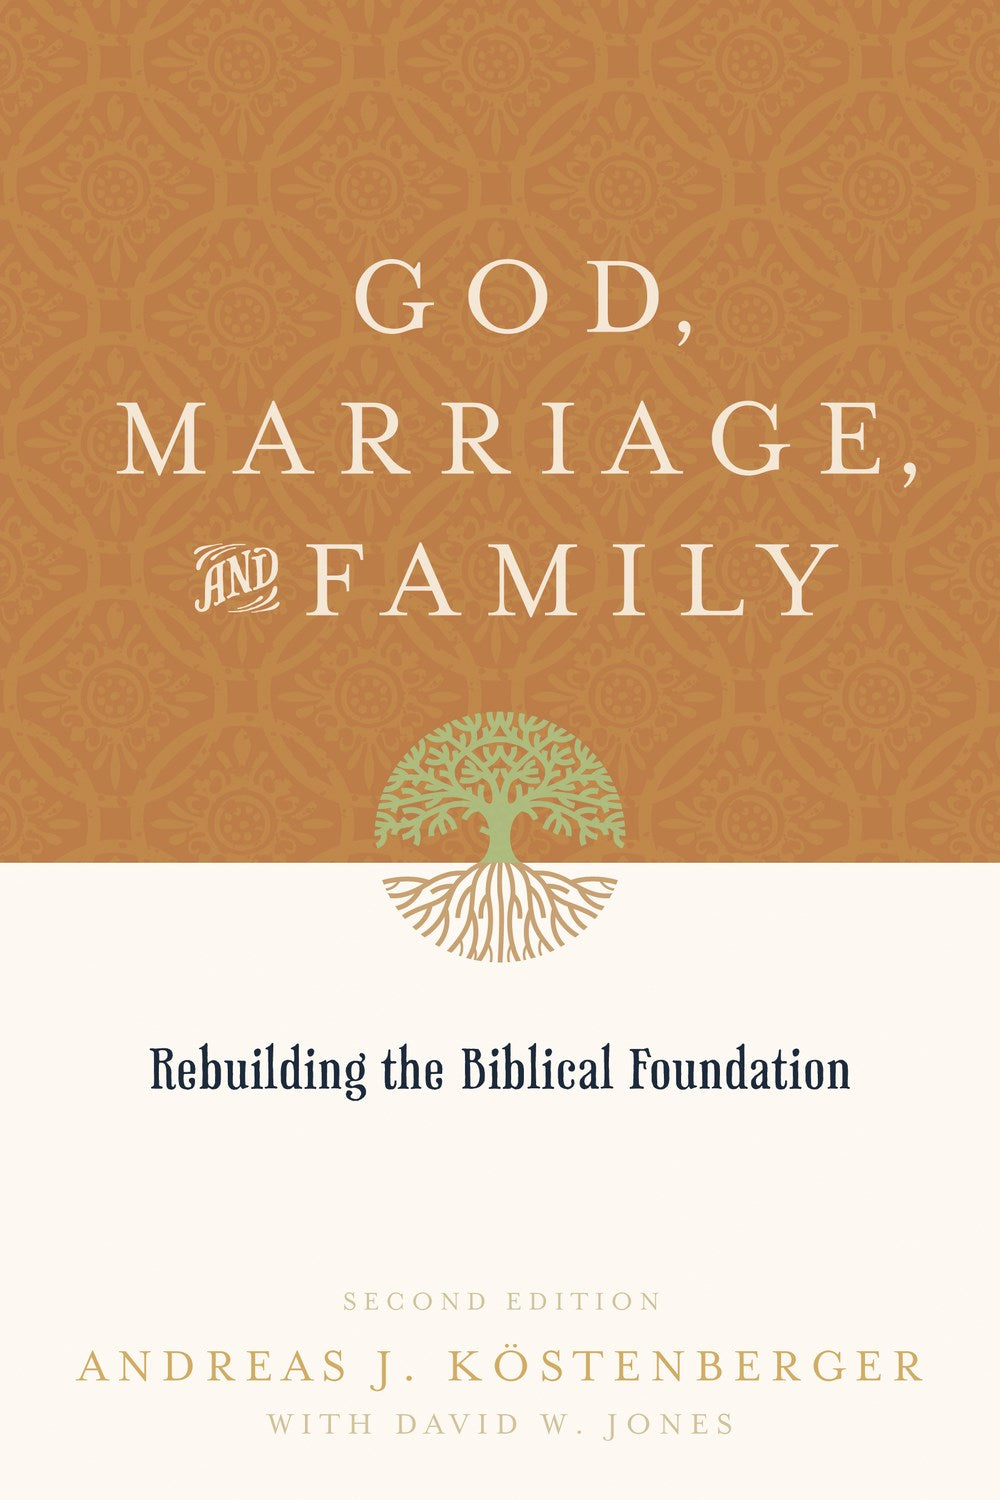 God Marriage And Family (Second Edition)